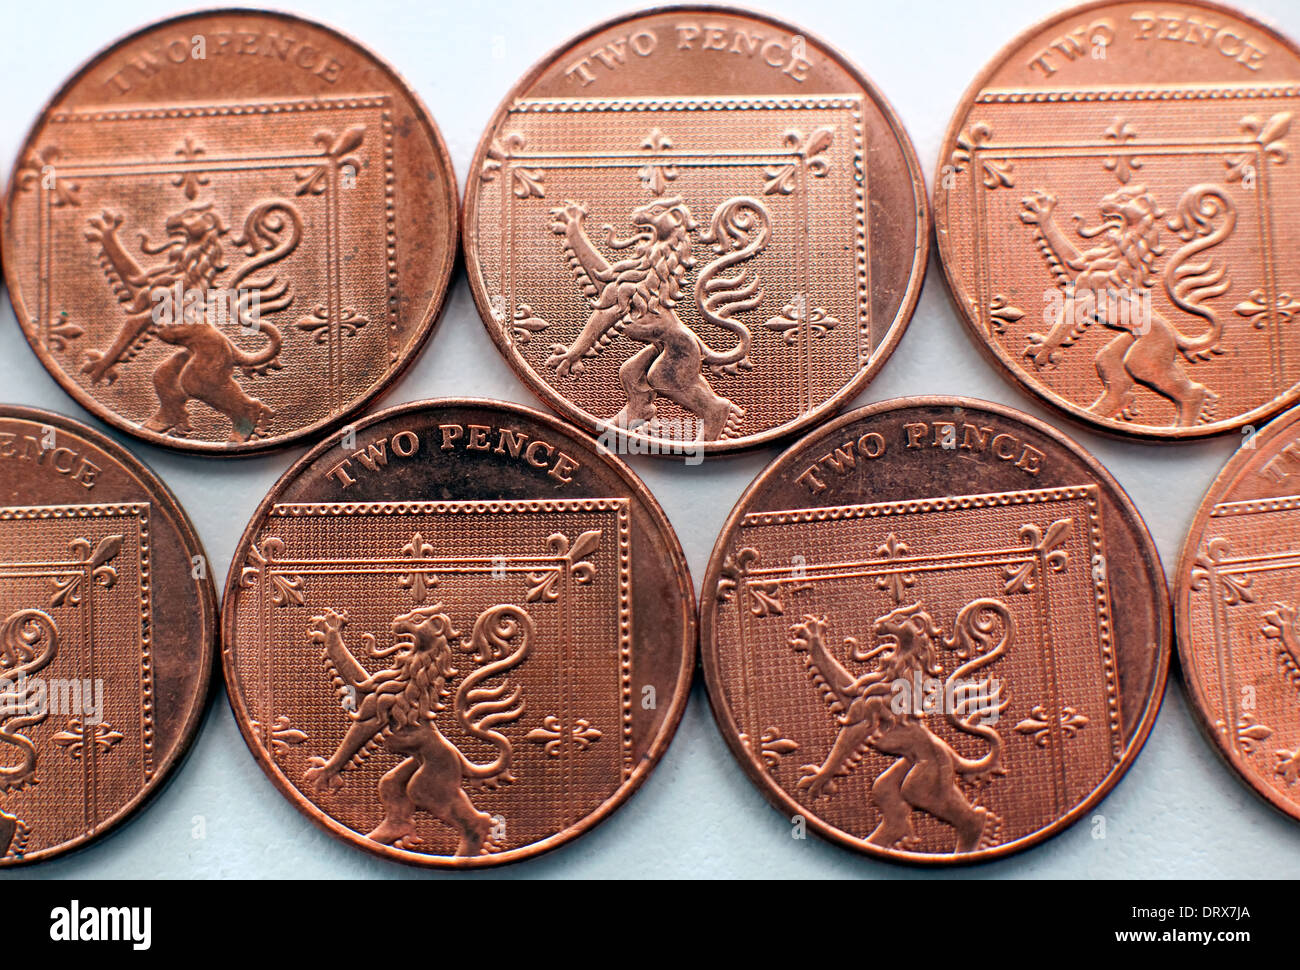 Two pence coins, London Stock Photo